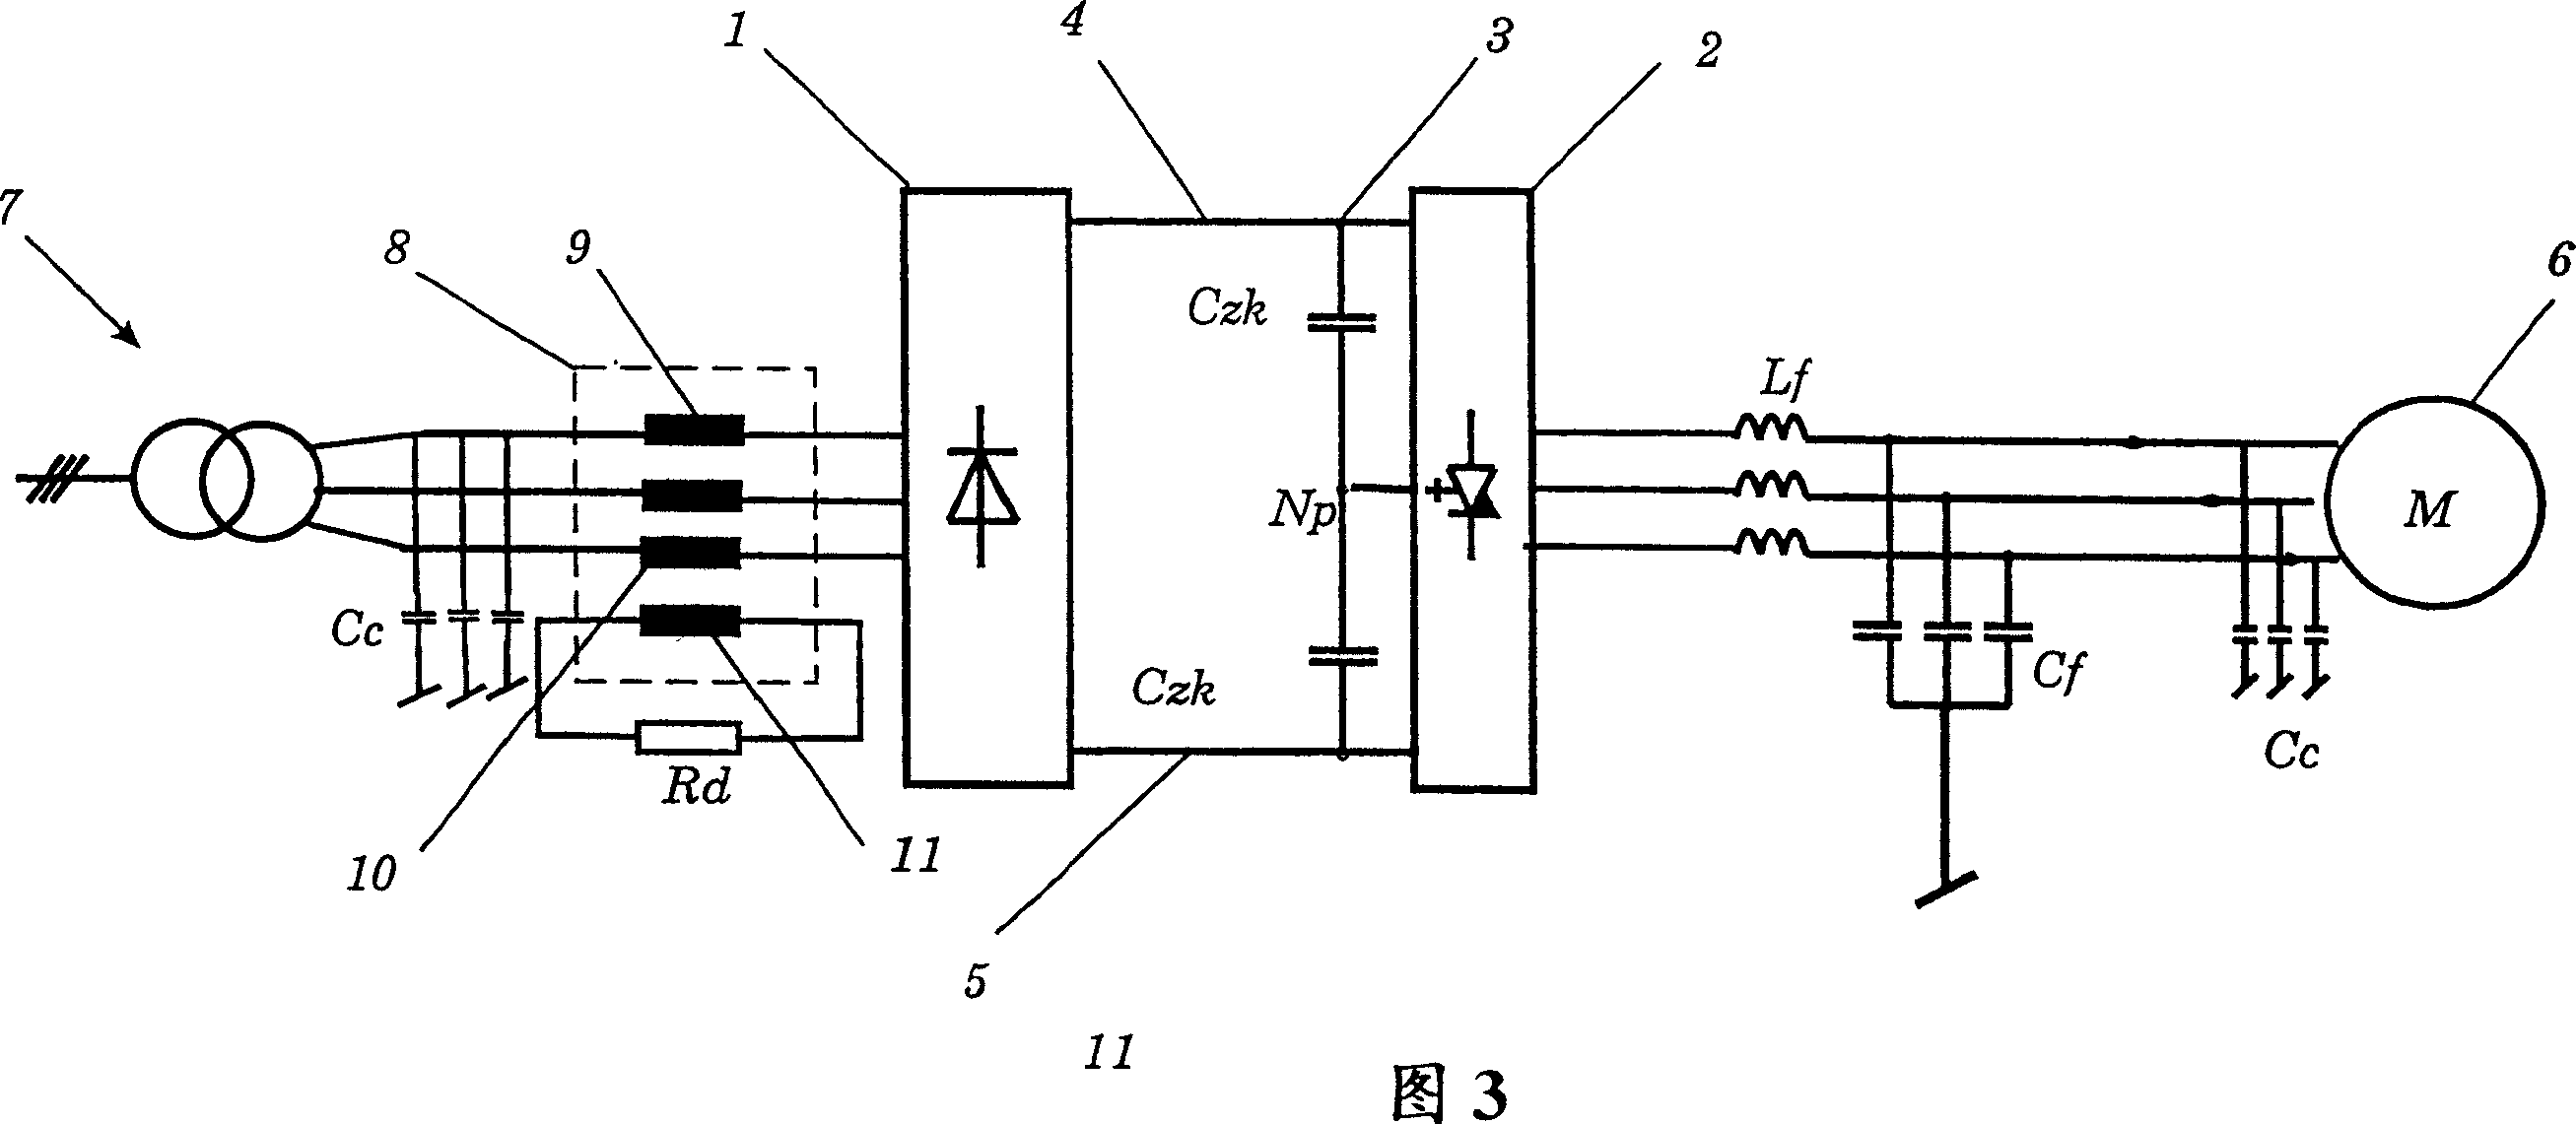 Converter circuit structure with direct voltage intermediate circuit